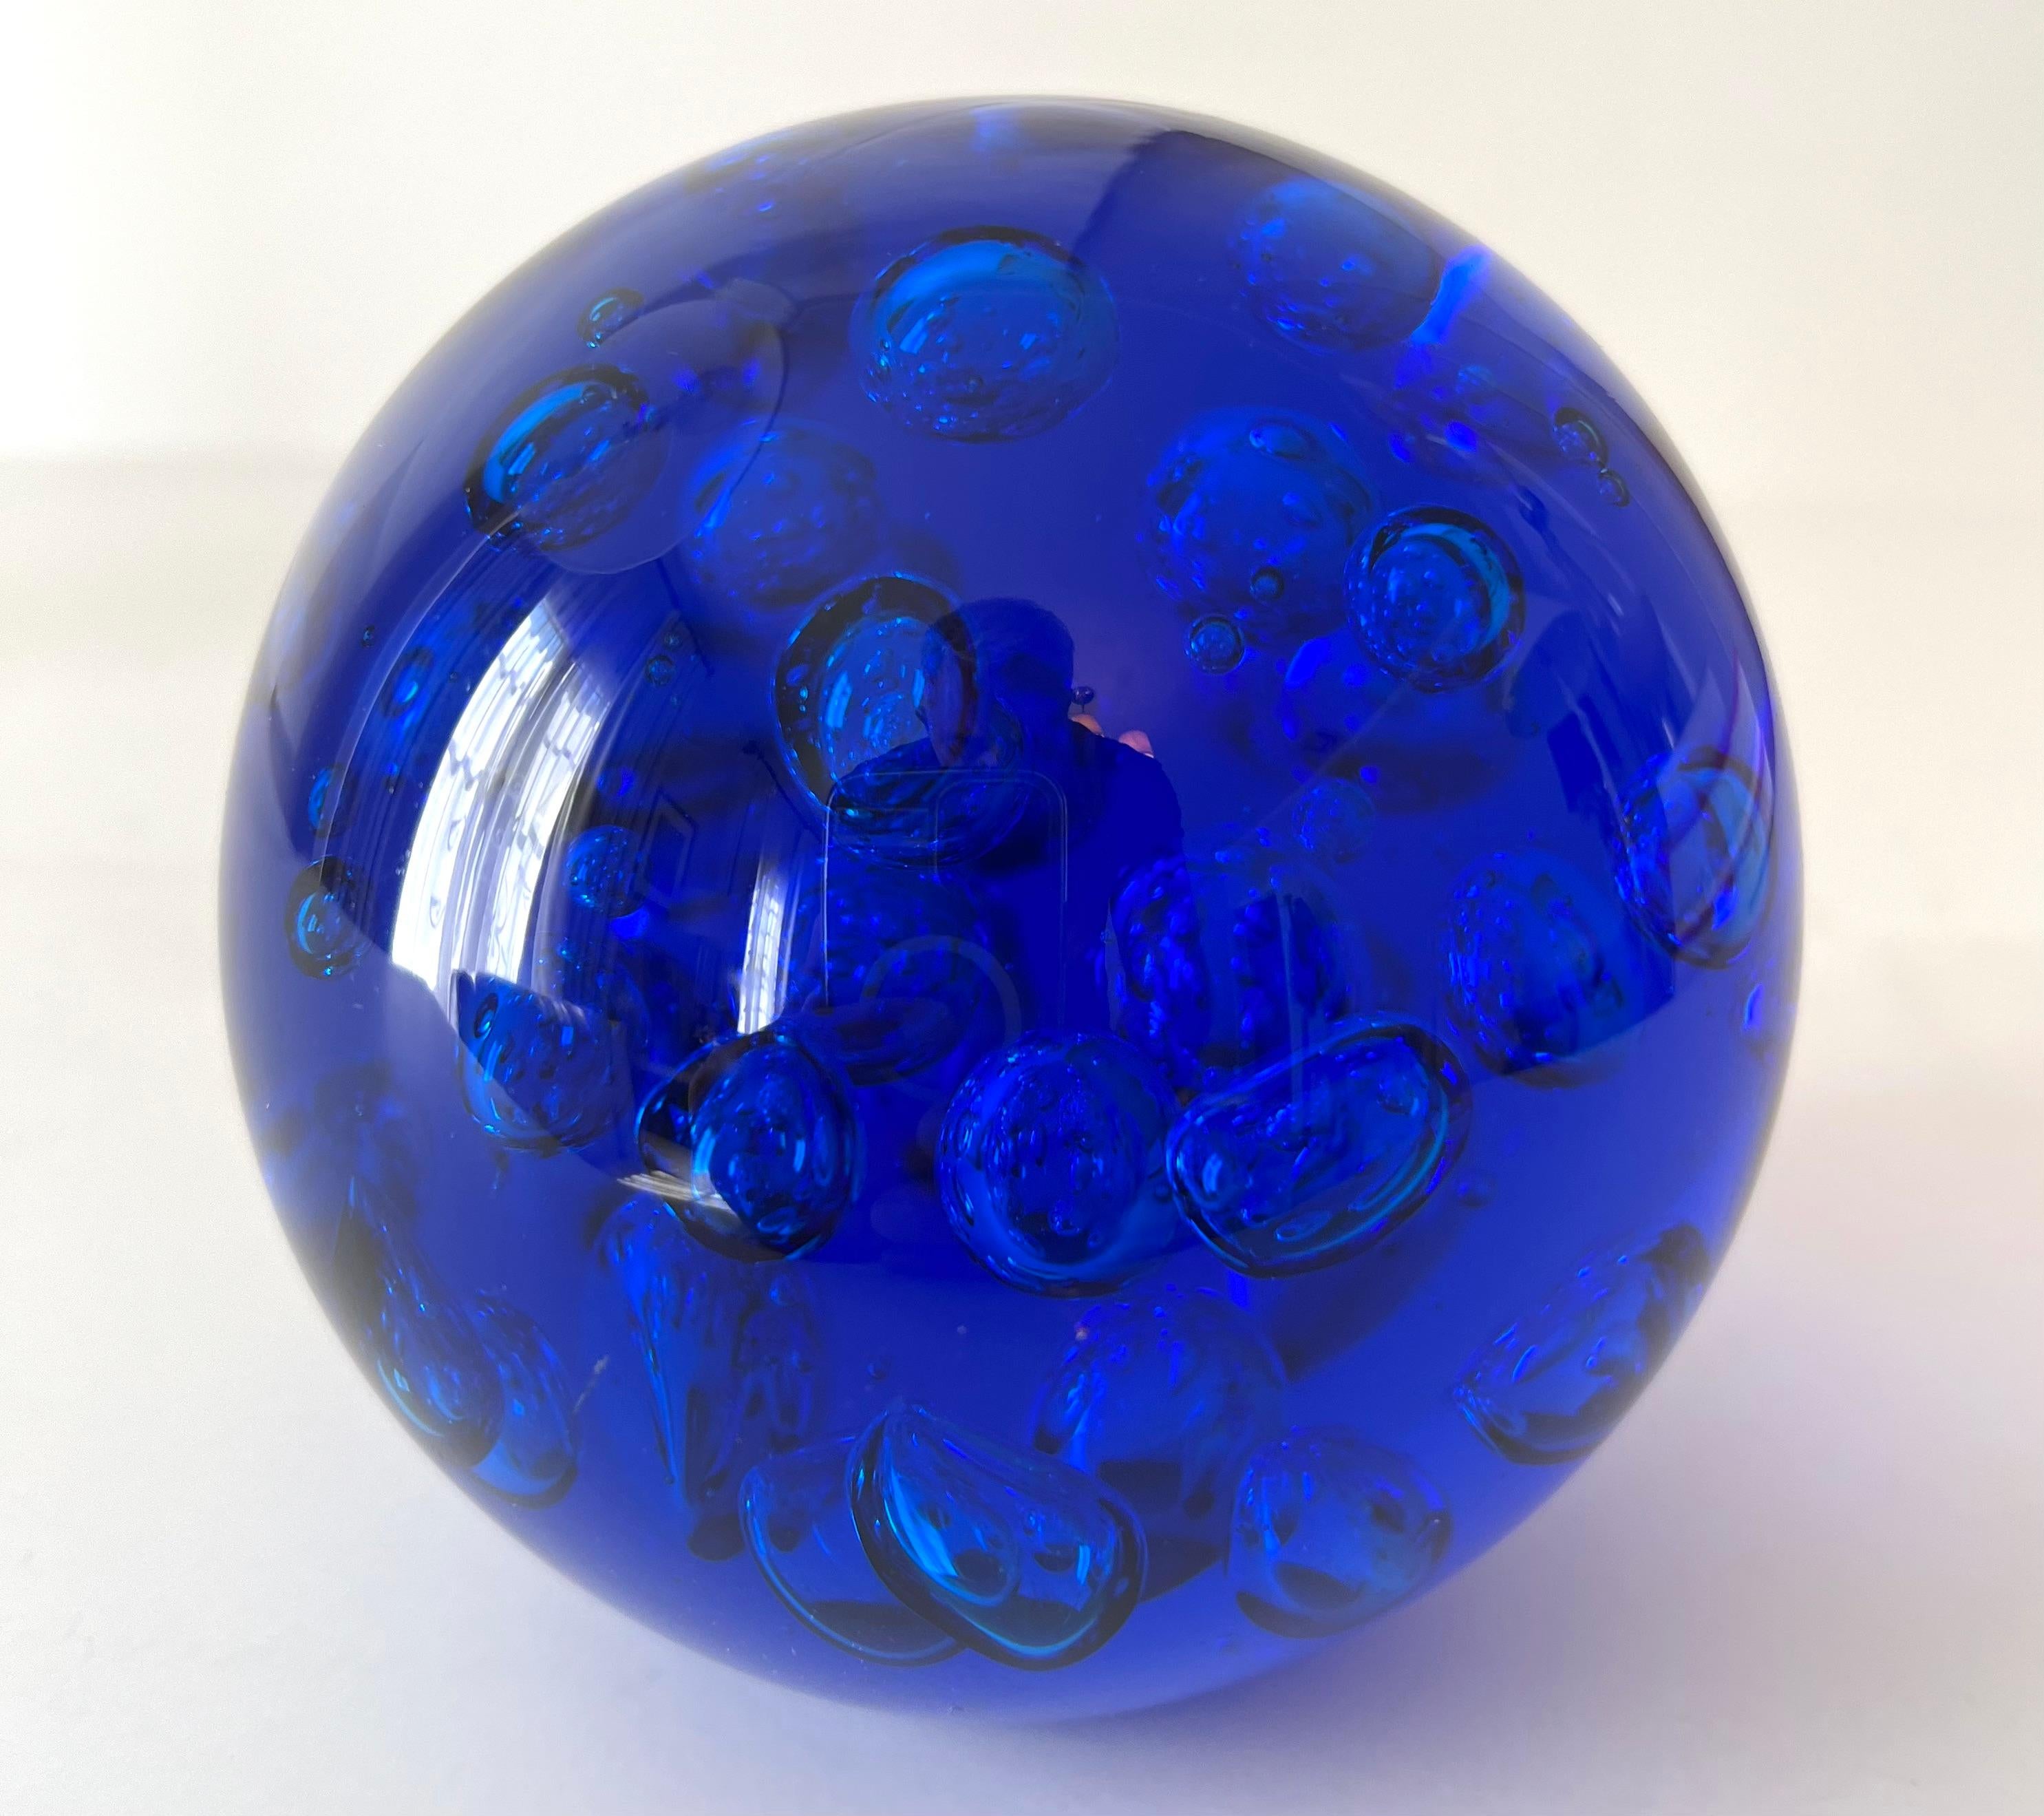 A brilliant cobalt Blue hand Blown glass paperweight. The color and size are very nice... the weight is heavy and substantial - great for paperweight or as a decorative object.

Not easily found, this is a unique piece and will definitely stand